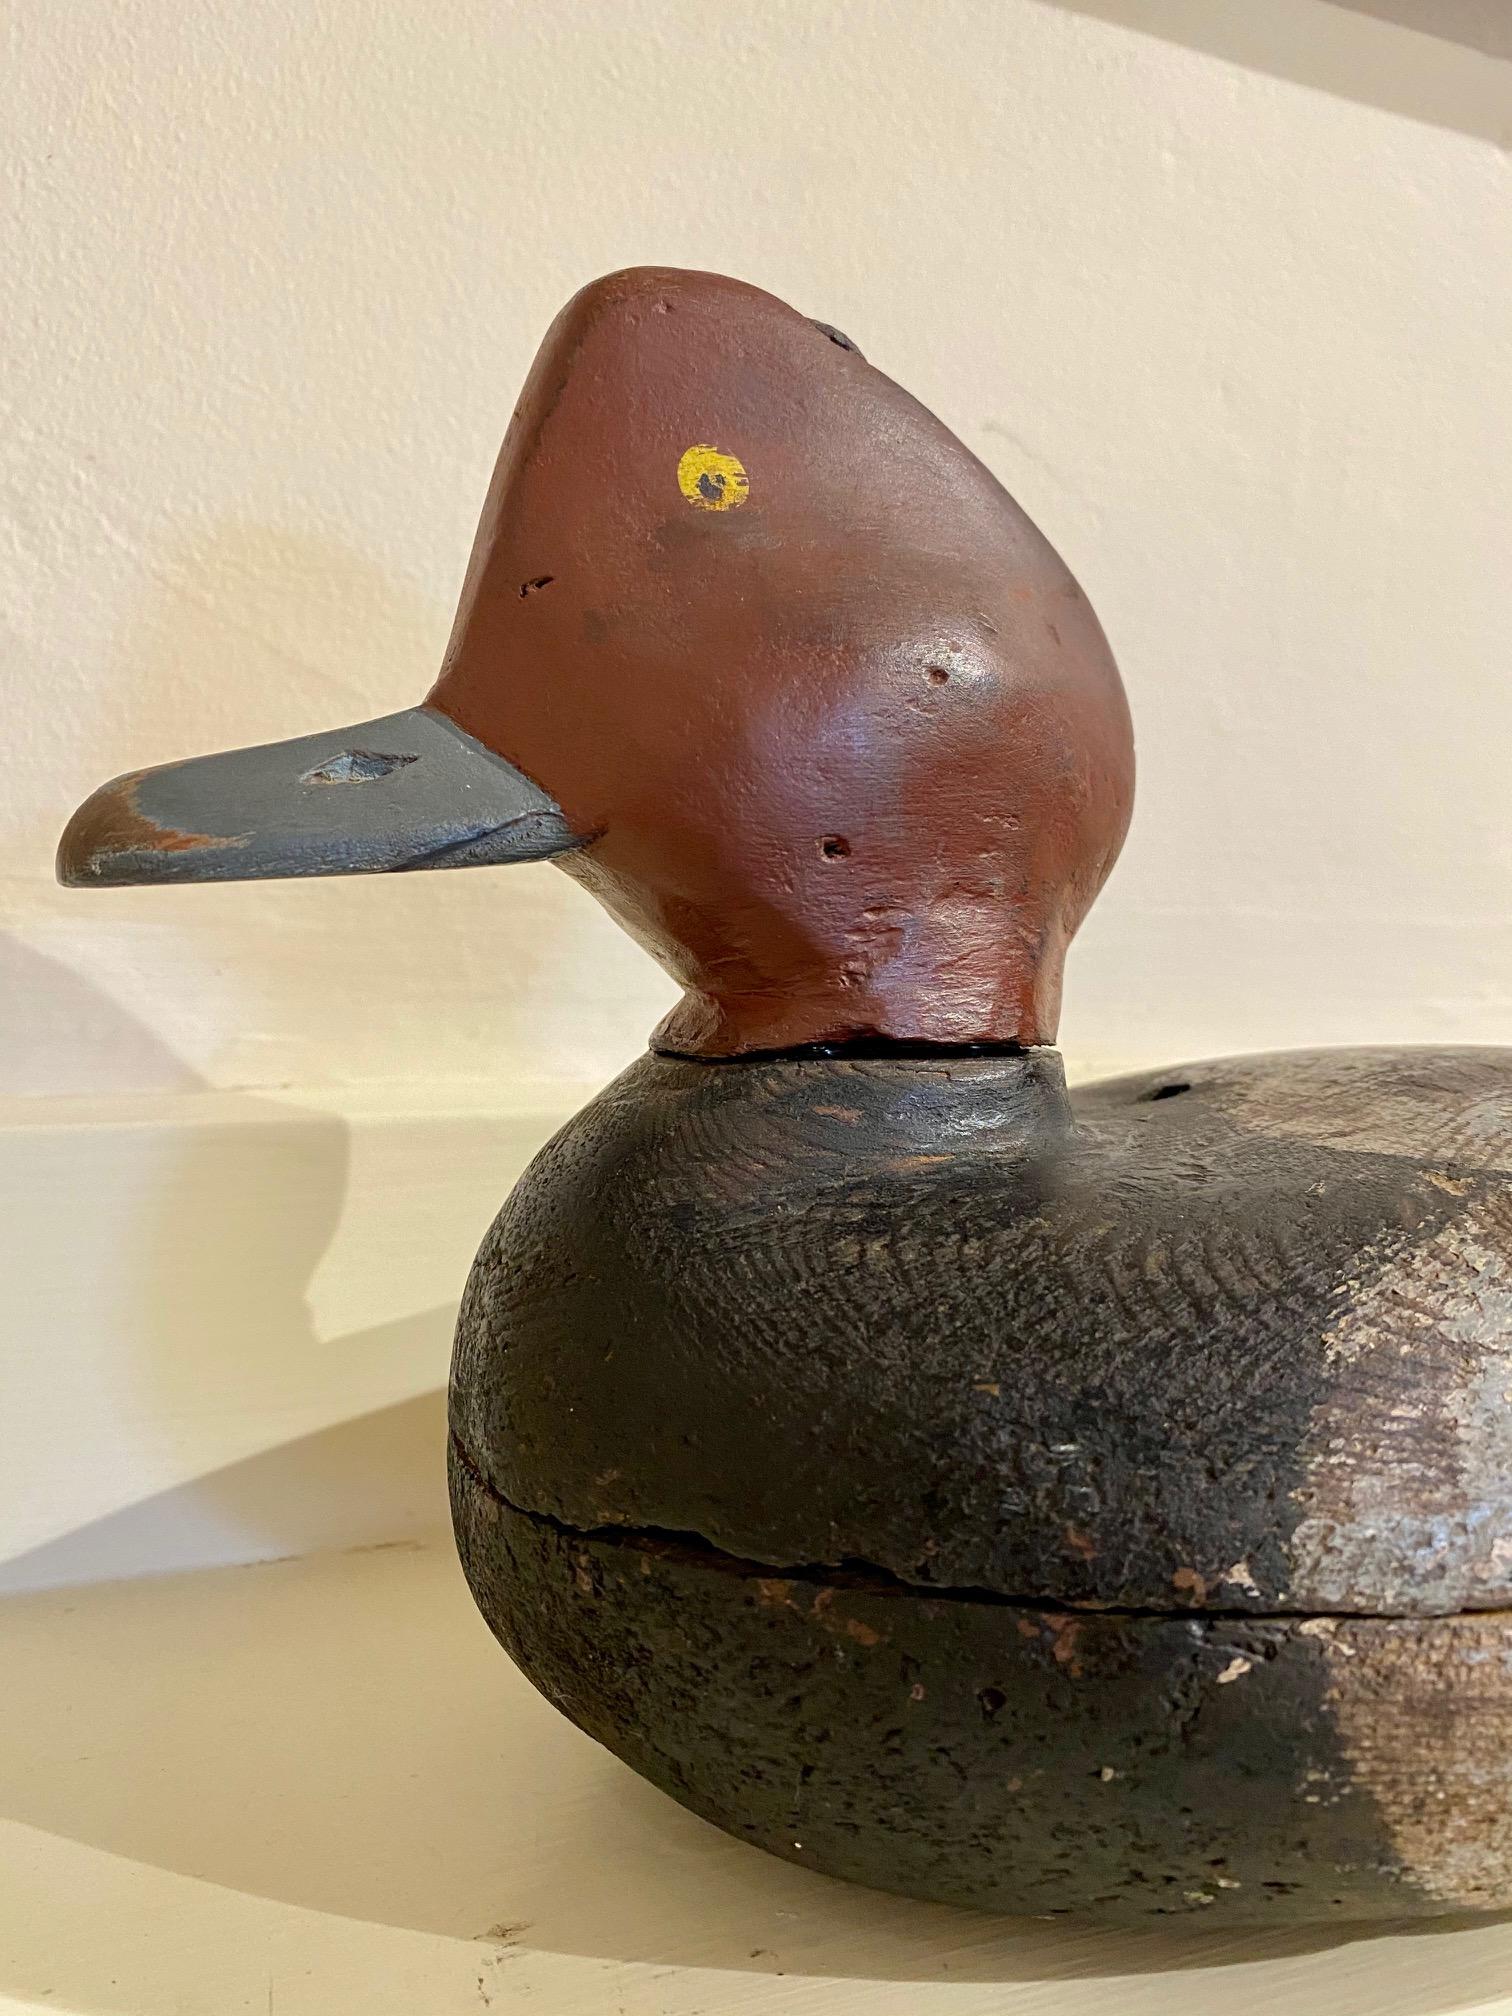 Antique Ward Brothers red head drake decoy, early period, circa 1930, having a hand carved hollow body, a distinctly shaped head with painted yellow eyes and carved nares and bill gape, and a small paddle tail, in worn original paint. This decoy has